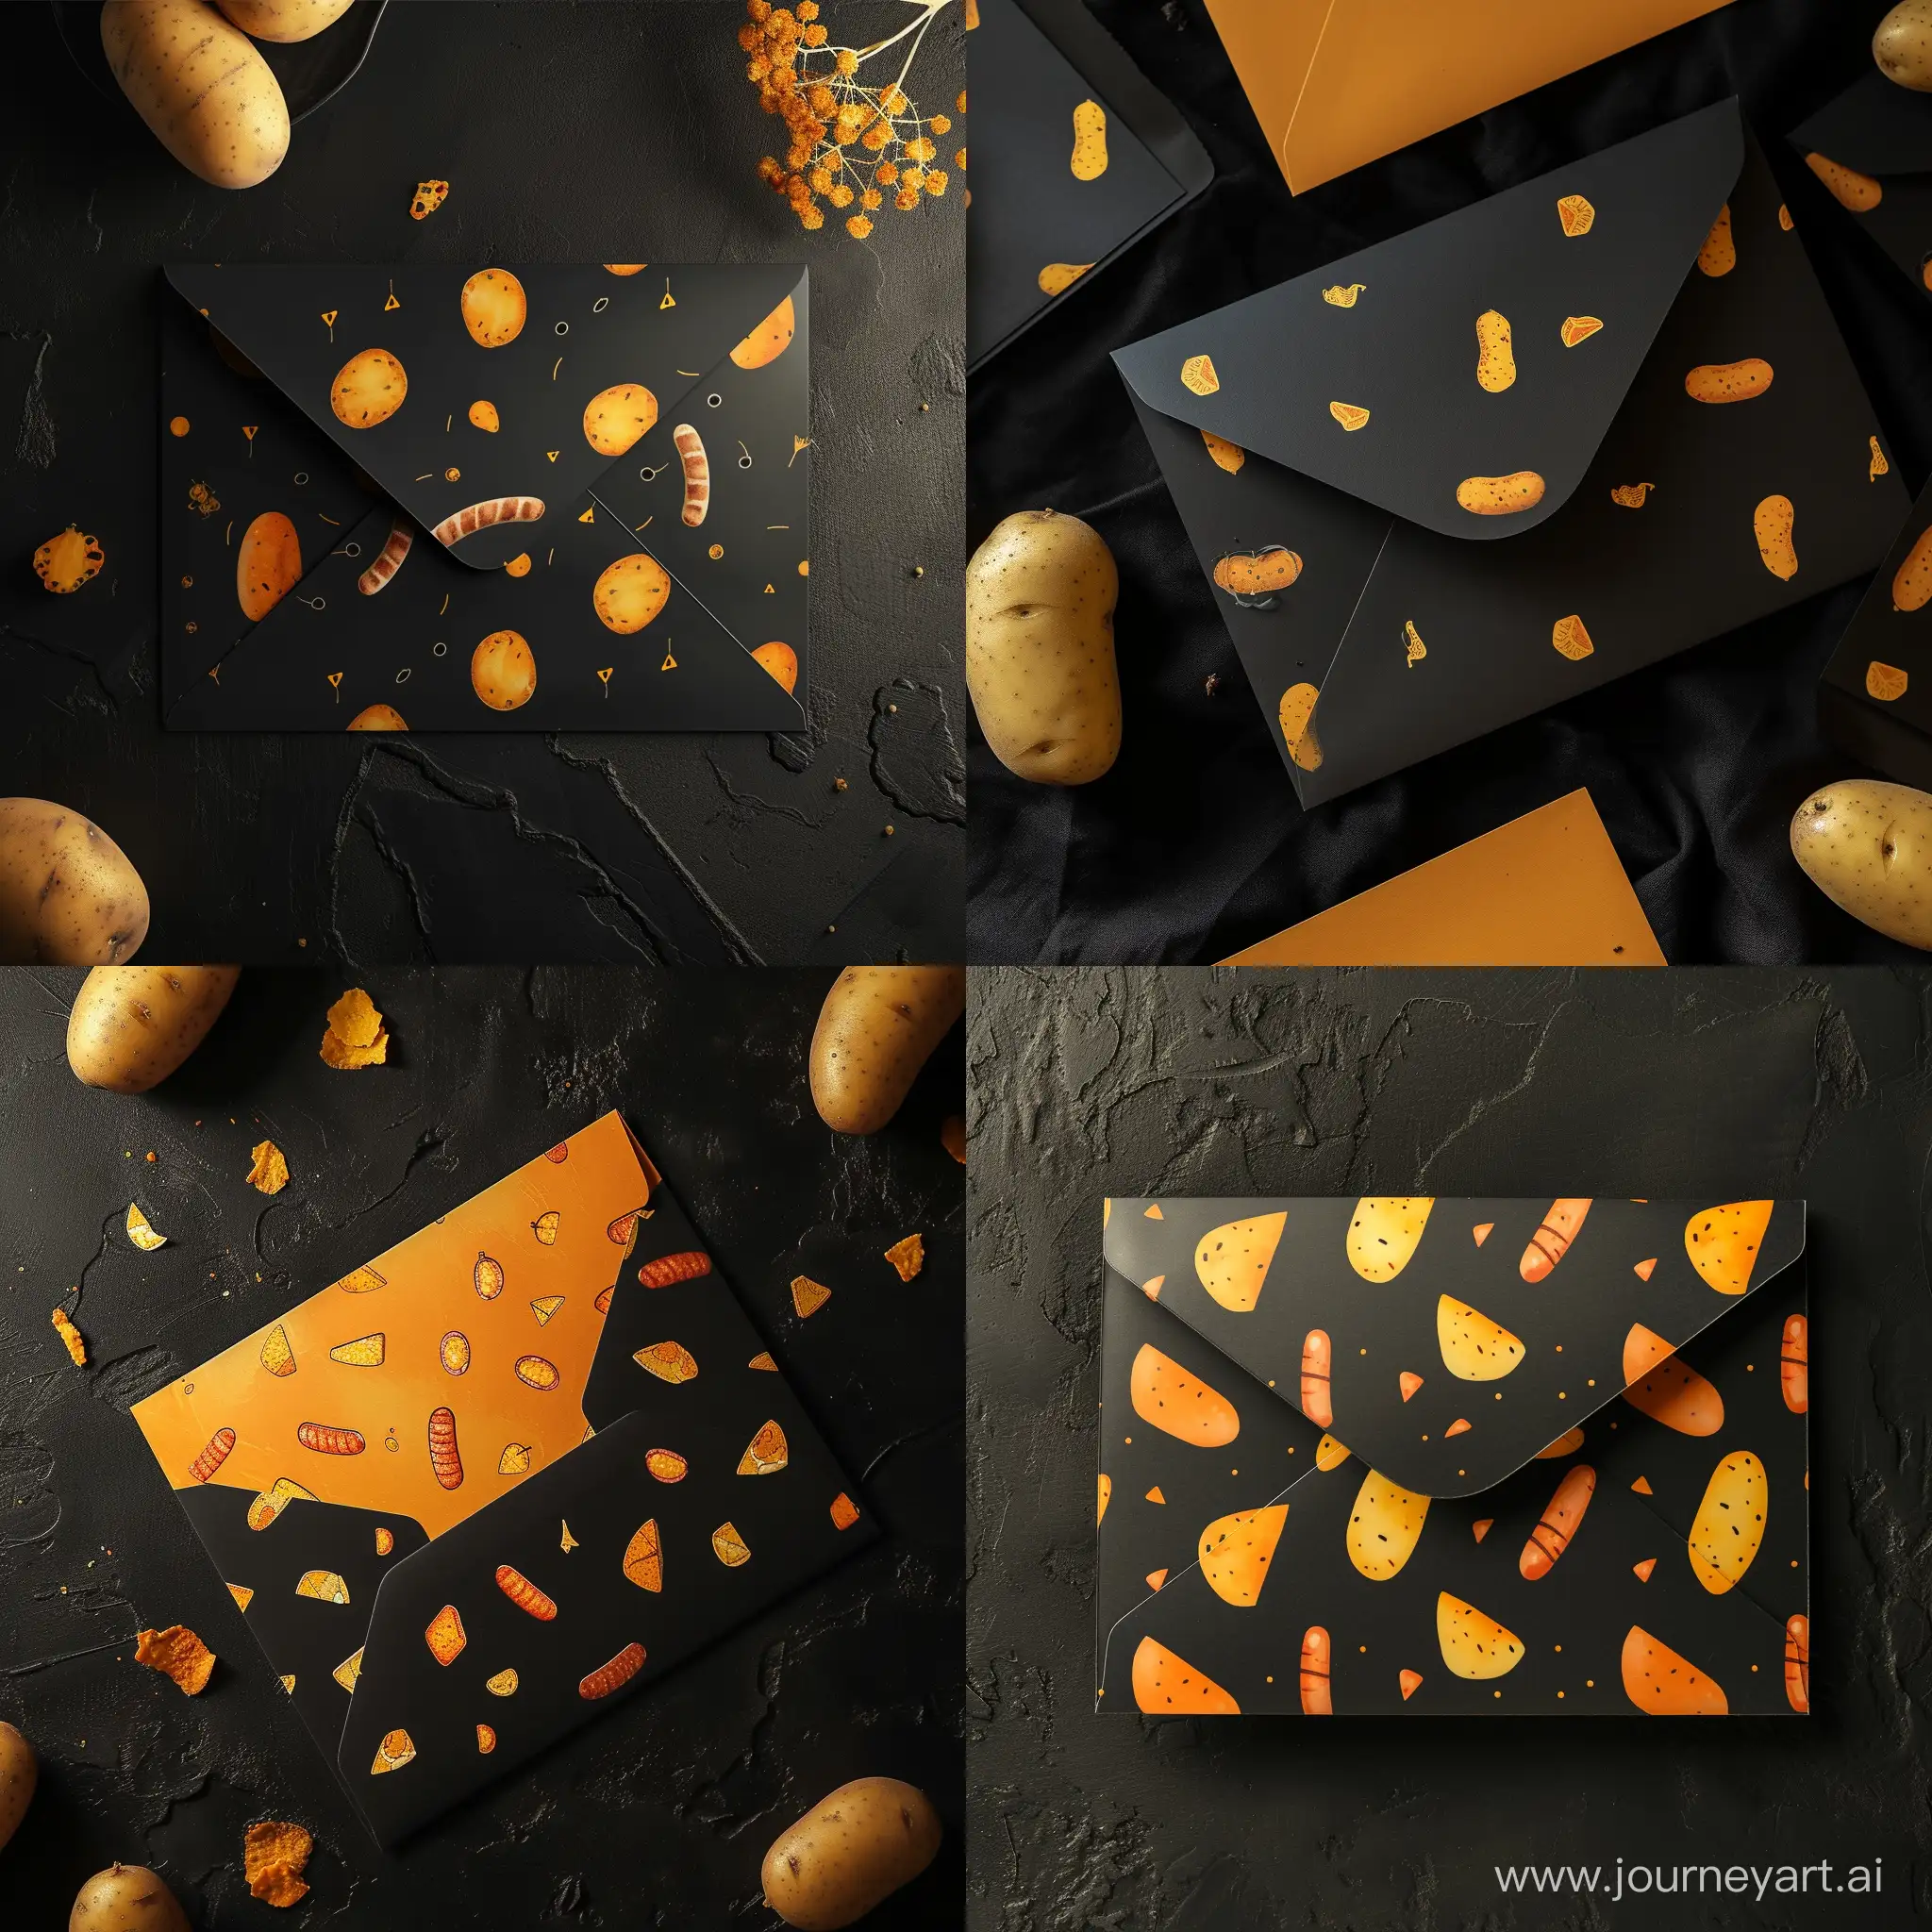 An empty Potato envelope with a design on it with a beautiful matte black background. Small pictures of sausages and potatoes are designed on it in yellow and orange colors.